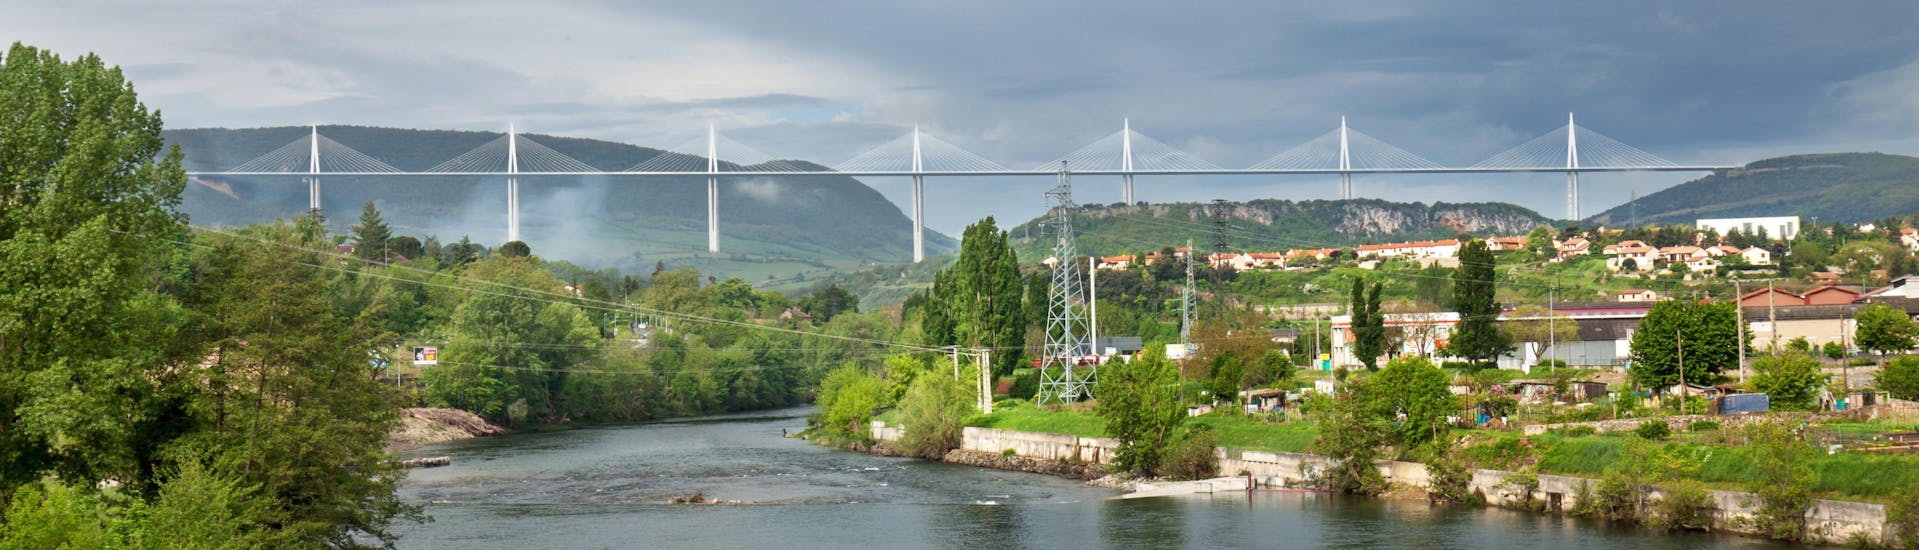 View of the Millau bridge under which flows the Tarn river, not far from Creissels, a popular destination to do canoeing.